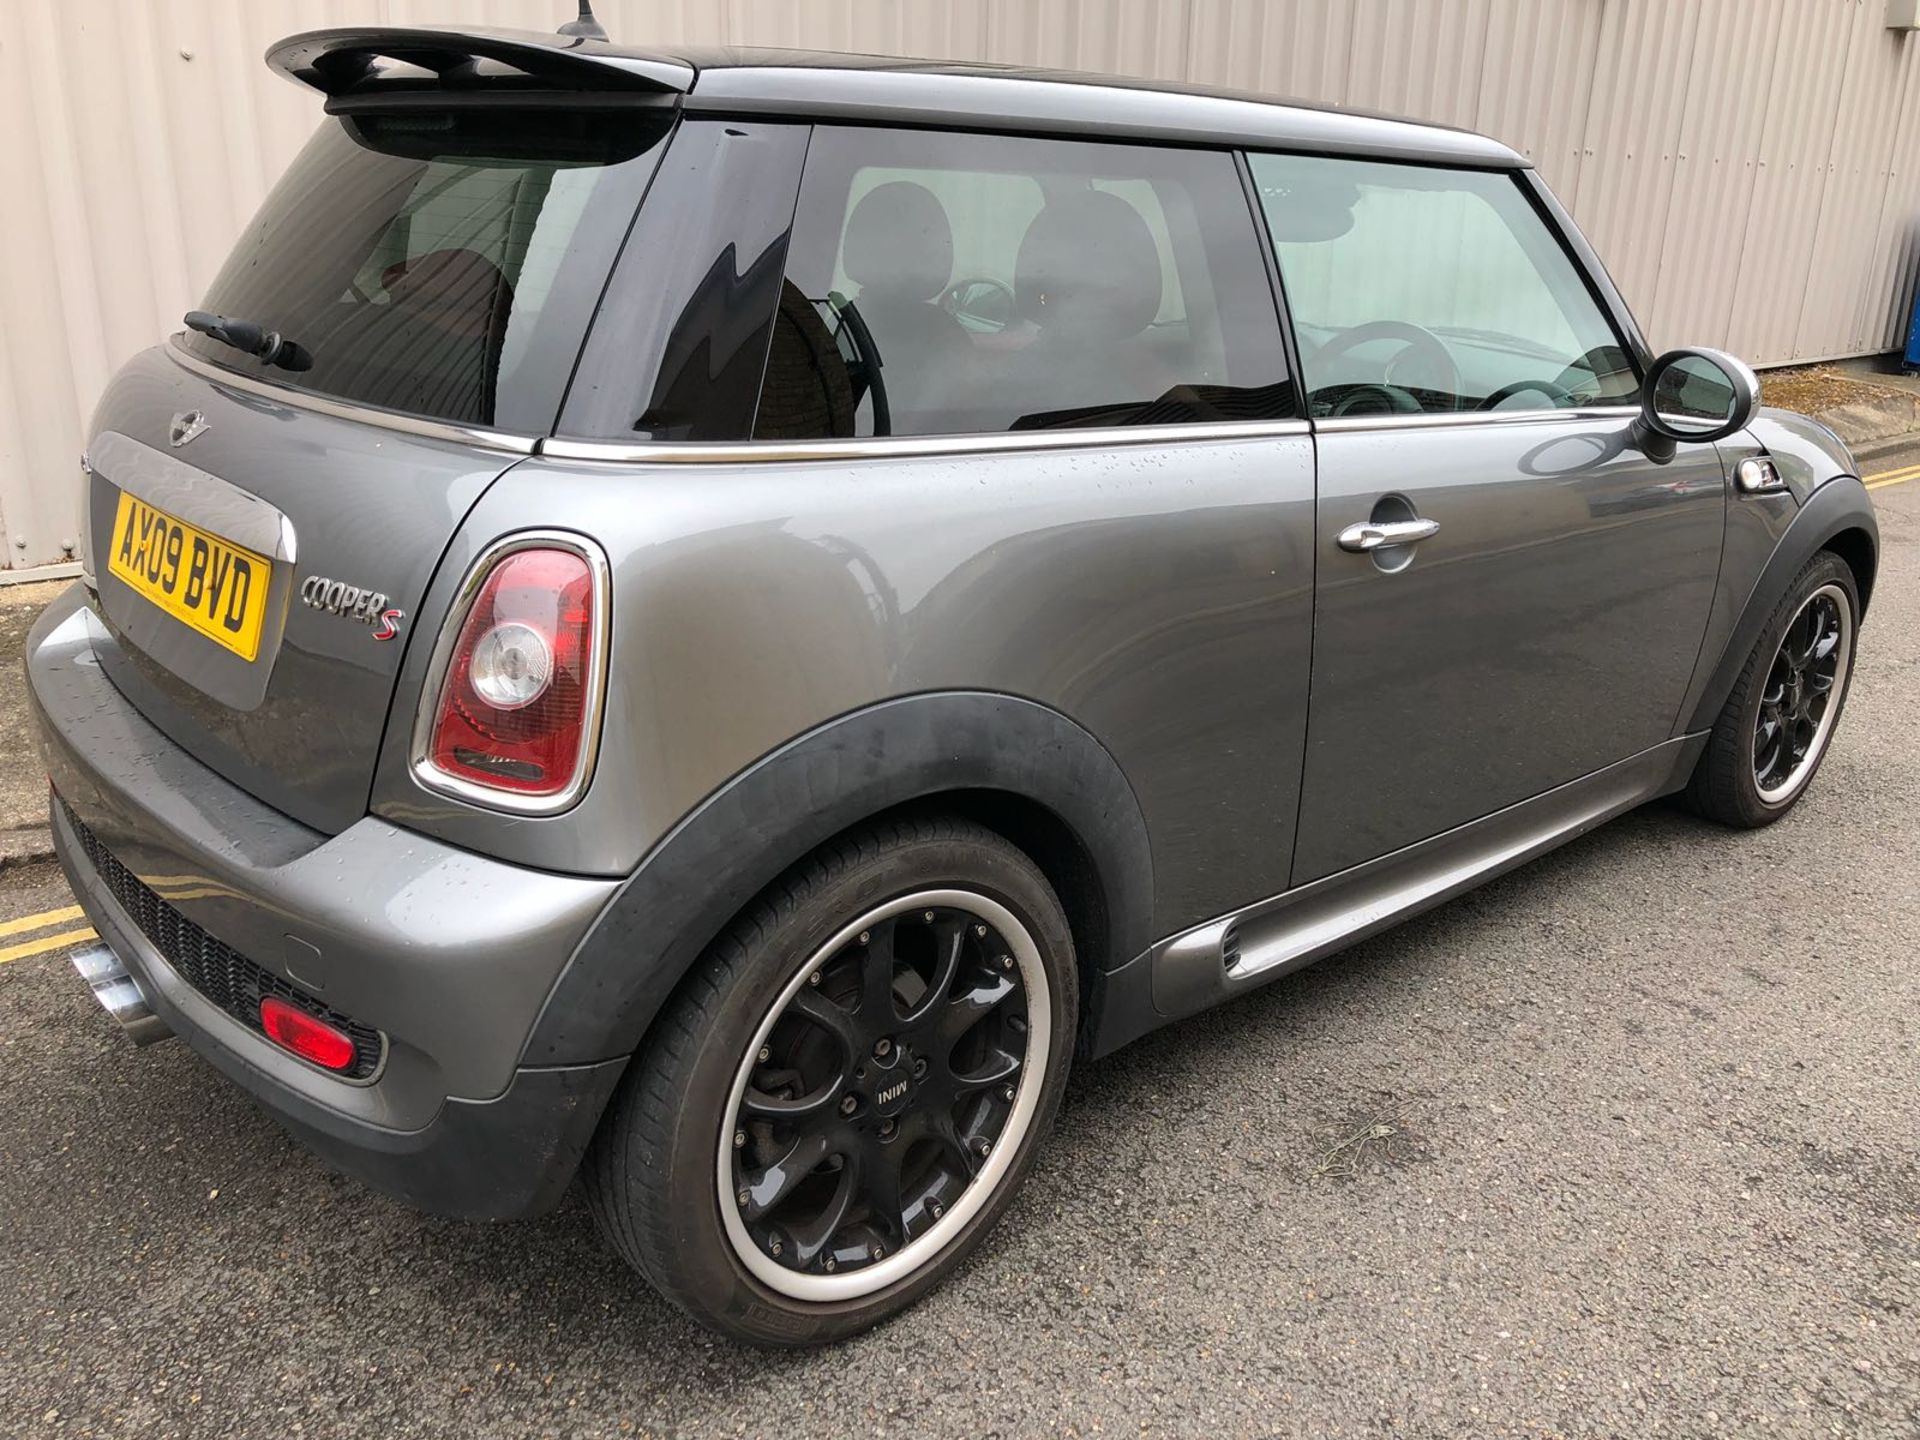 MINI COOPER S JOHN WORKS. 2009/09. 79,000 miles. Full history with 9 stamps in the book. - Bild 3 aus 19